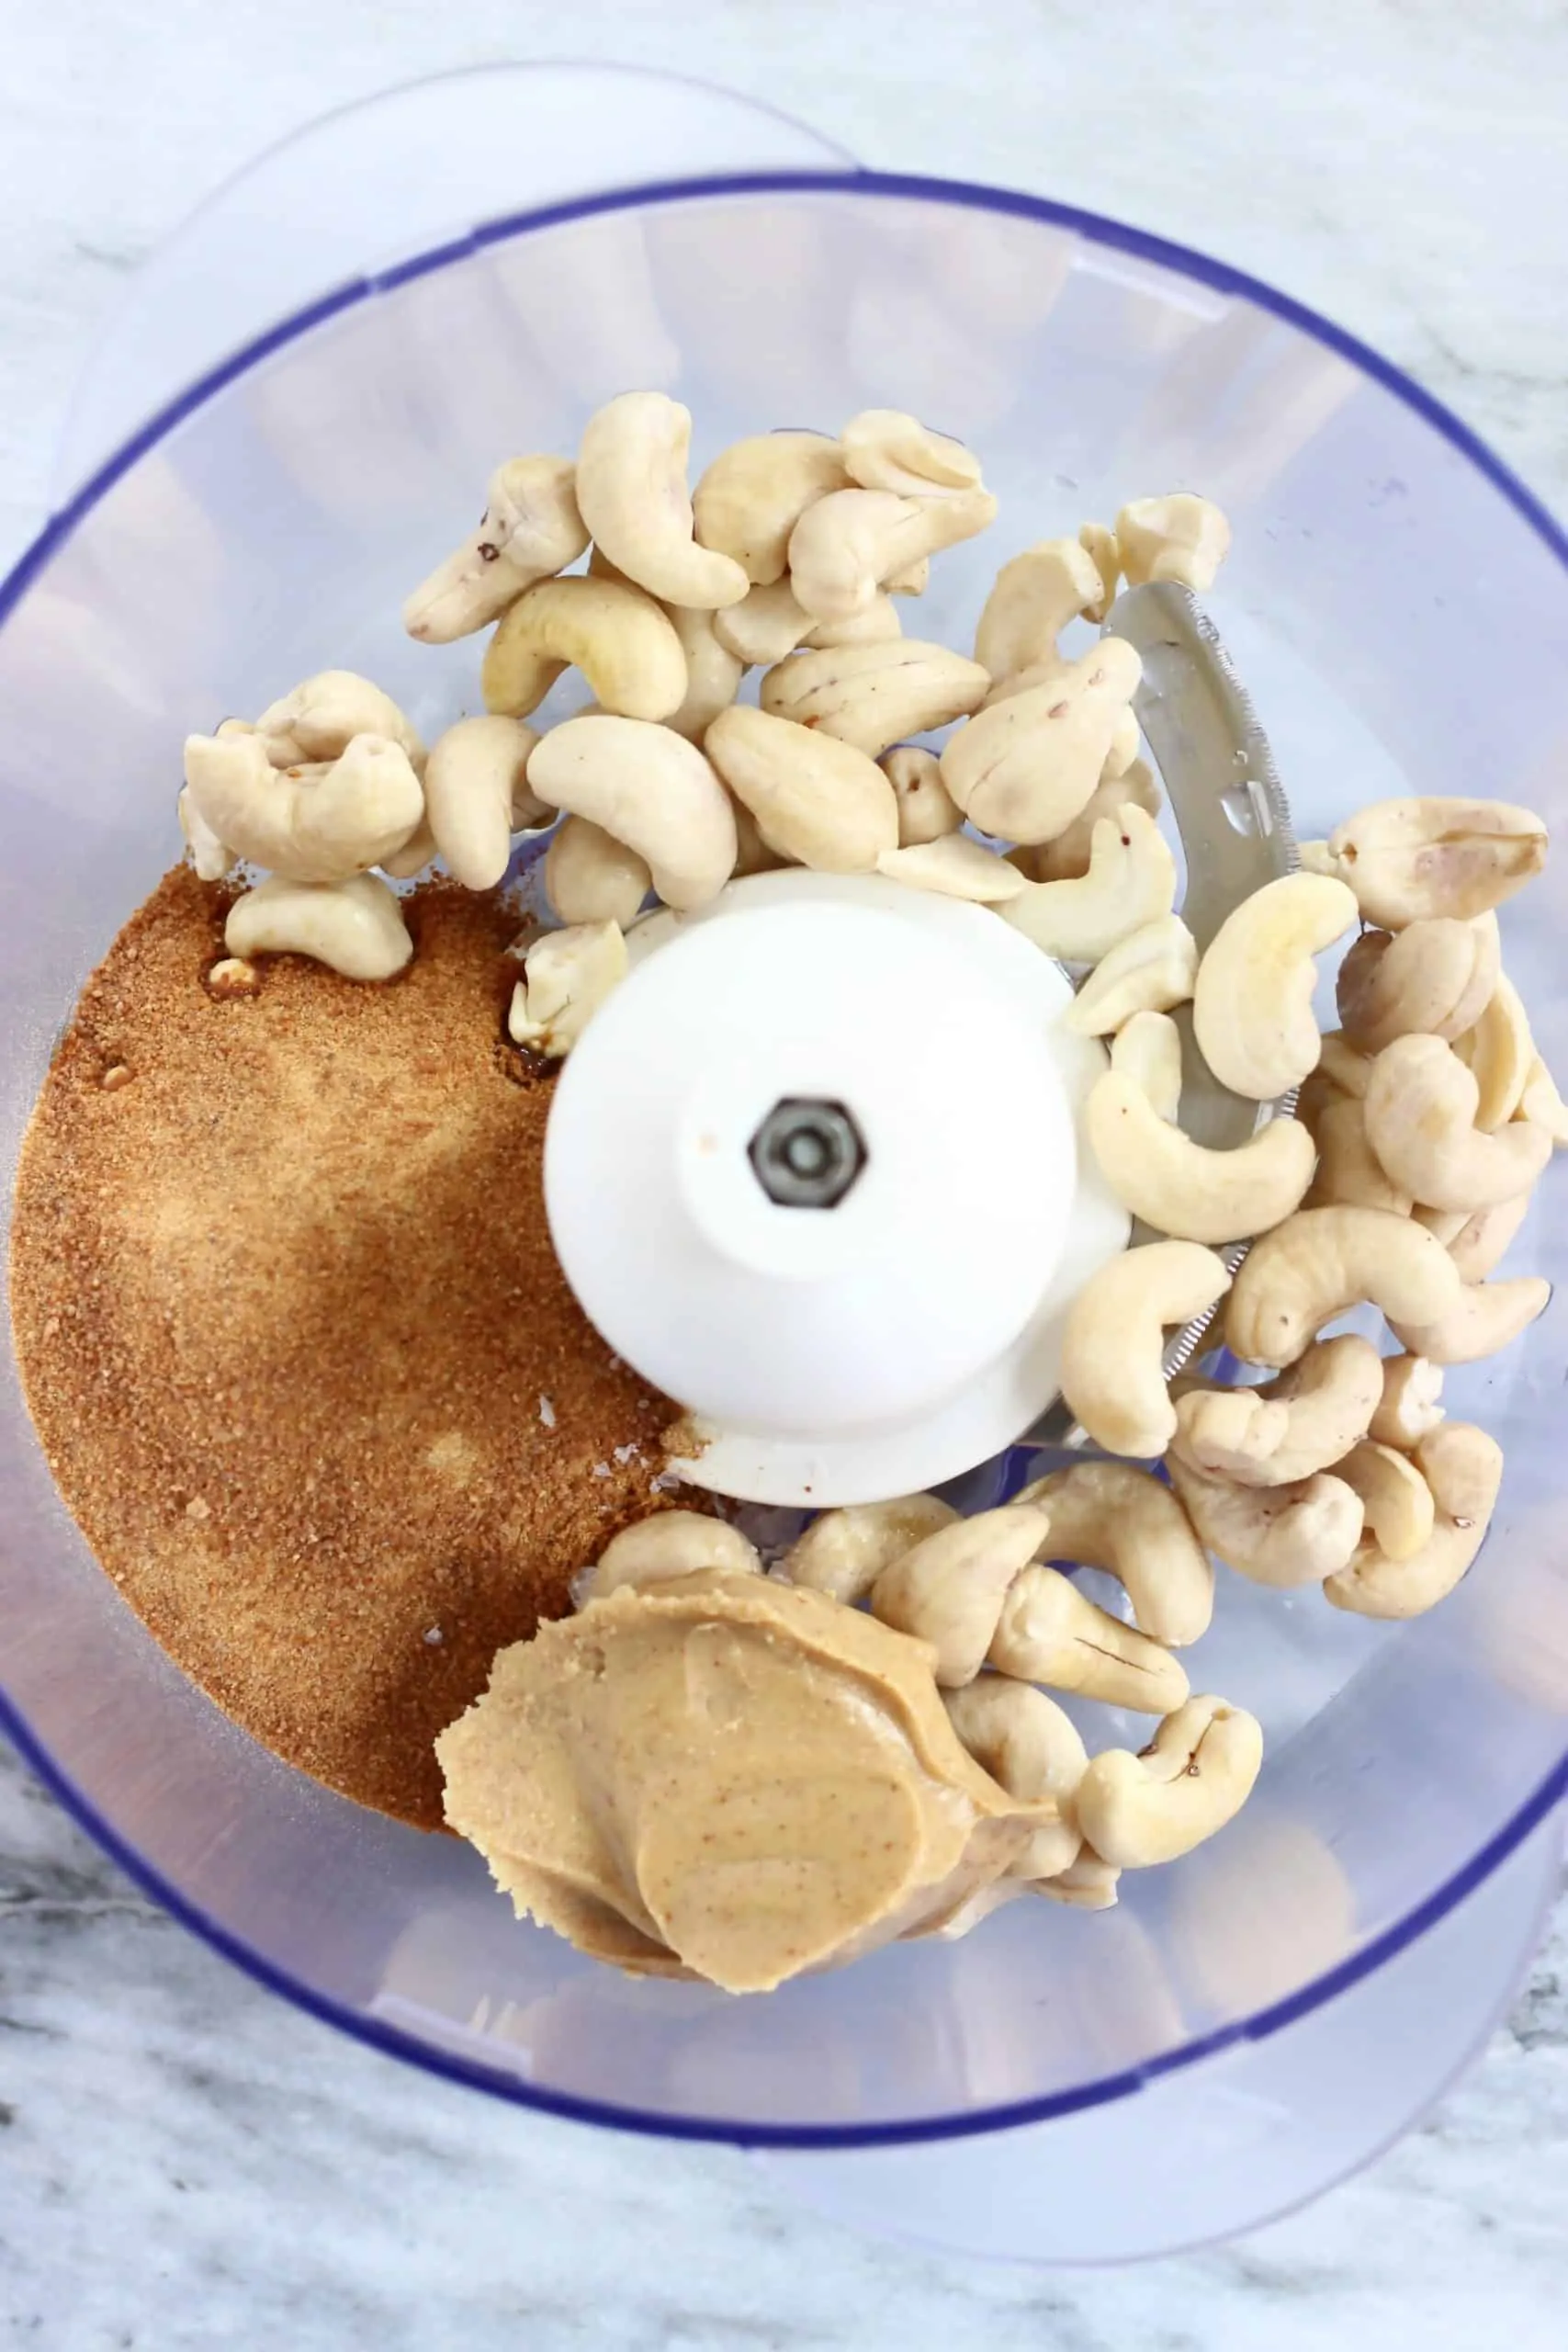 Cashew nuts, almond butter and coconut sugar in a food processor